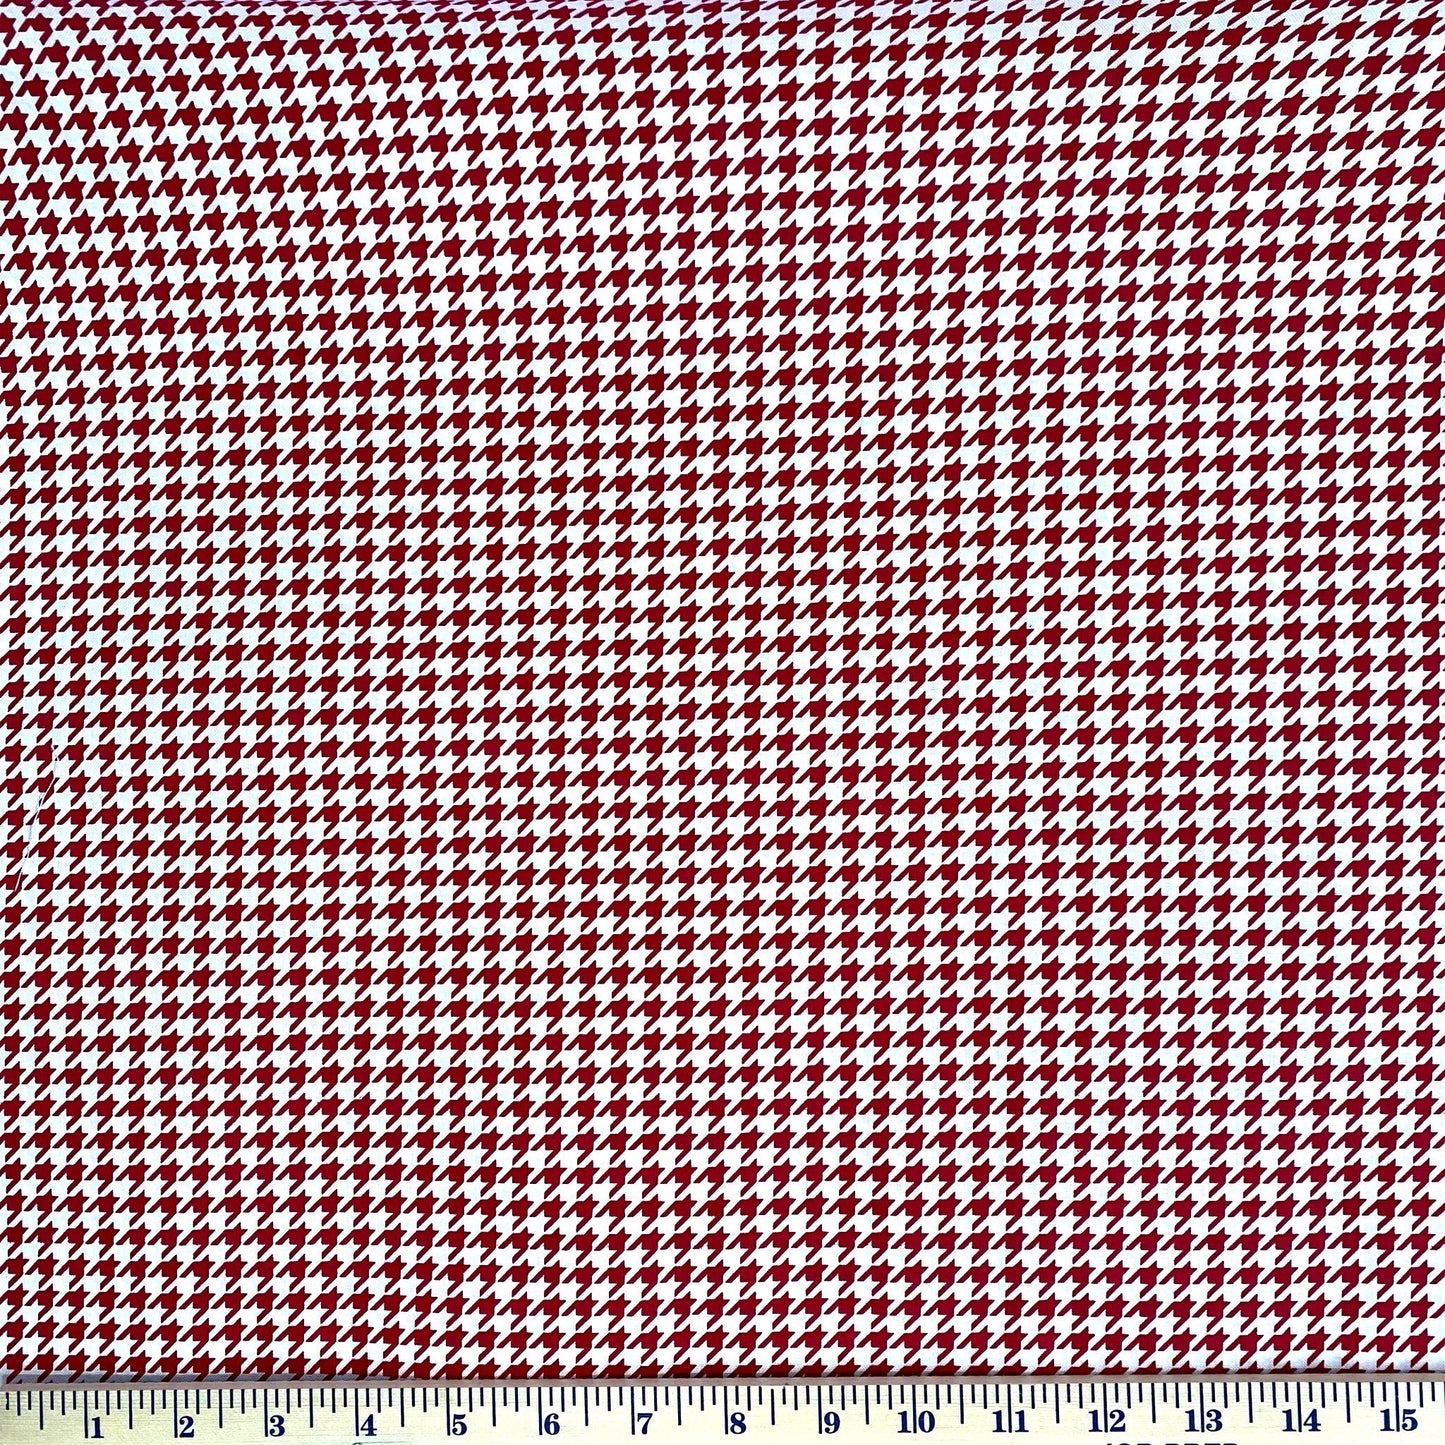 Red on White Houndstooth from the Kimberbell Basics line designed by Kim Christopherson for Maywood Studio. This fabric features a small red houndstooth print on a white background and is a fantastic choice for adding texture and color to a quilt. Stitcher's Joy